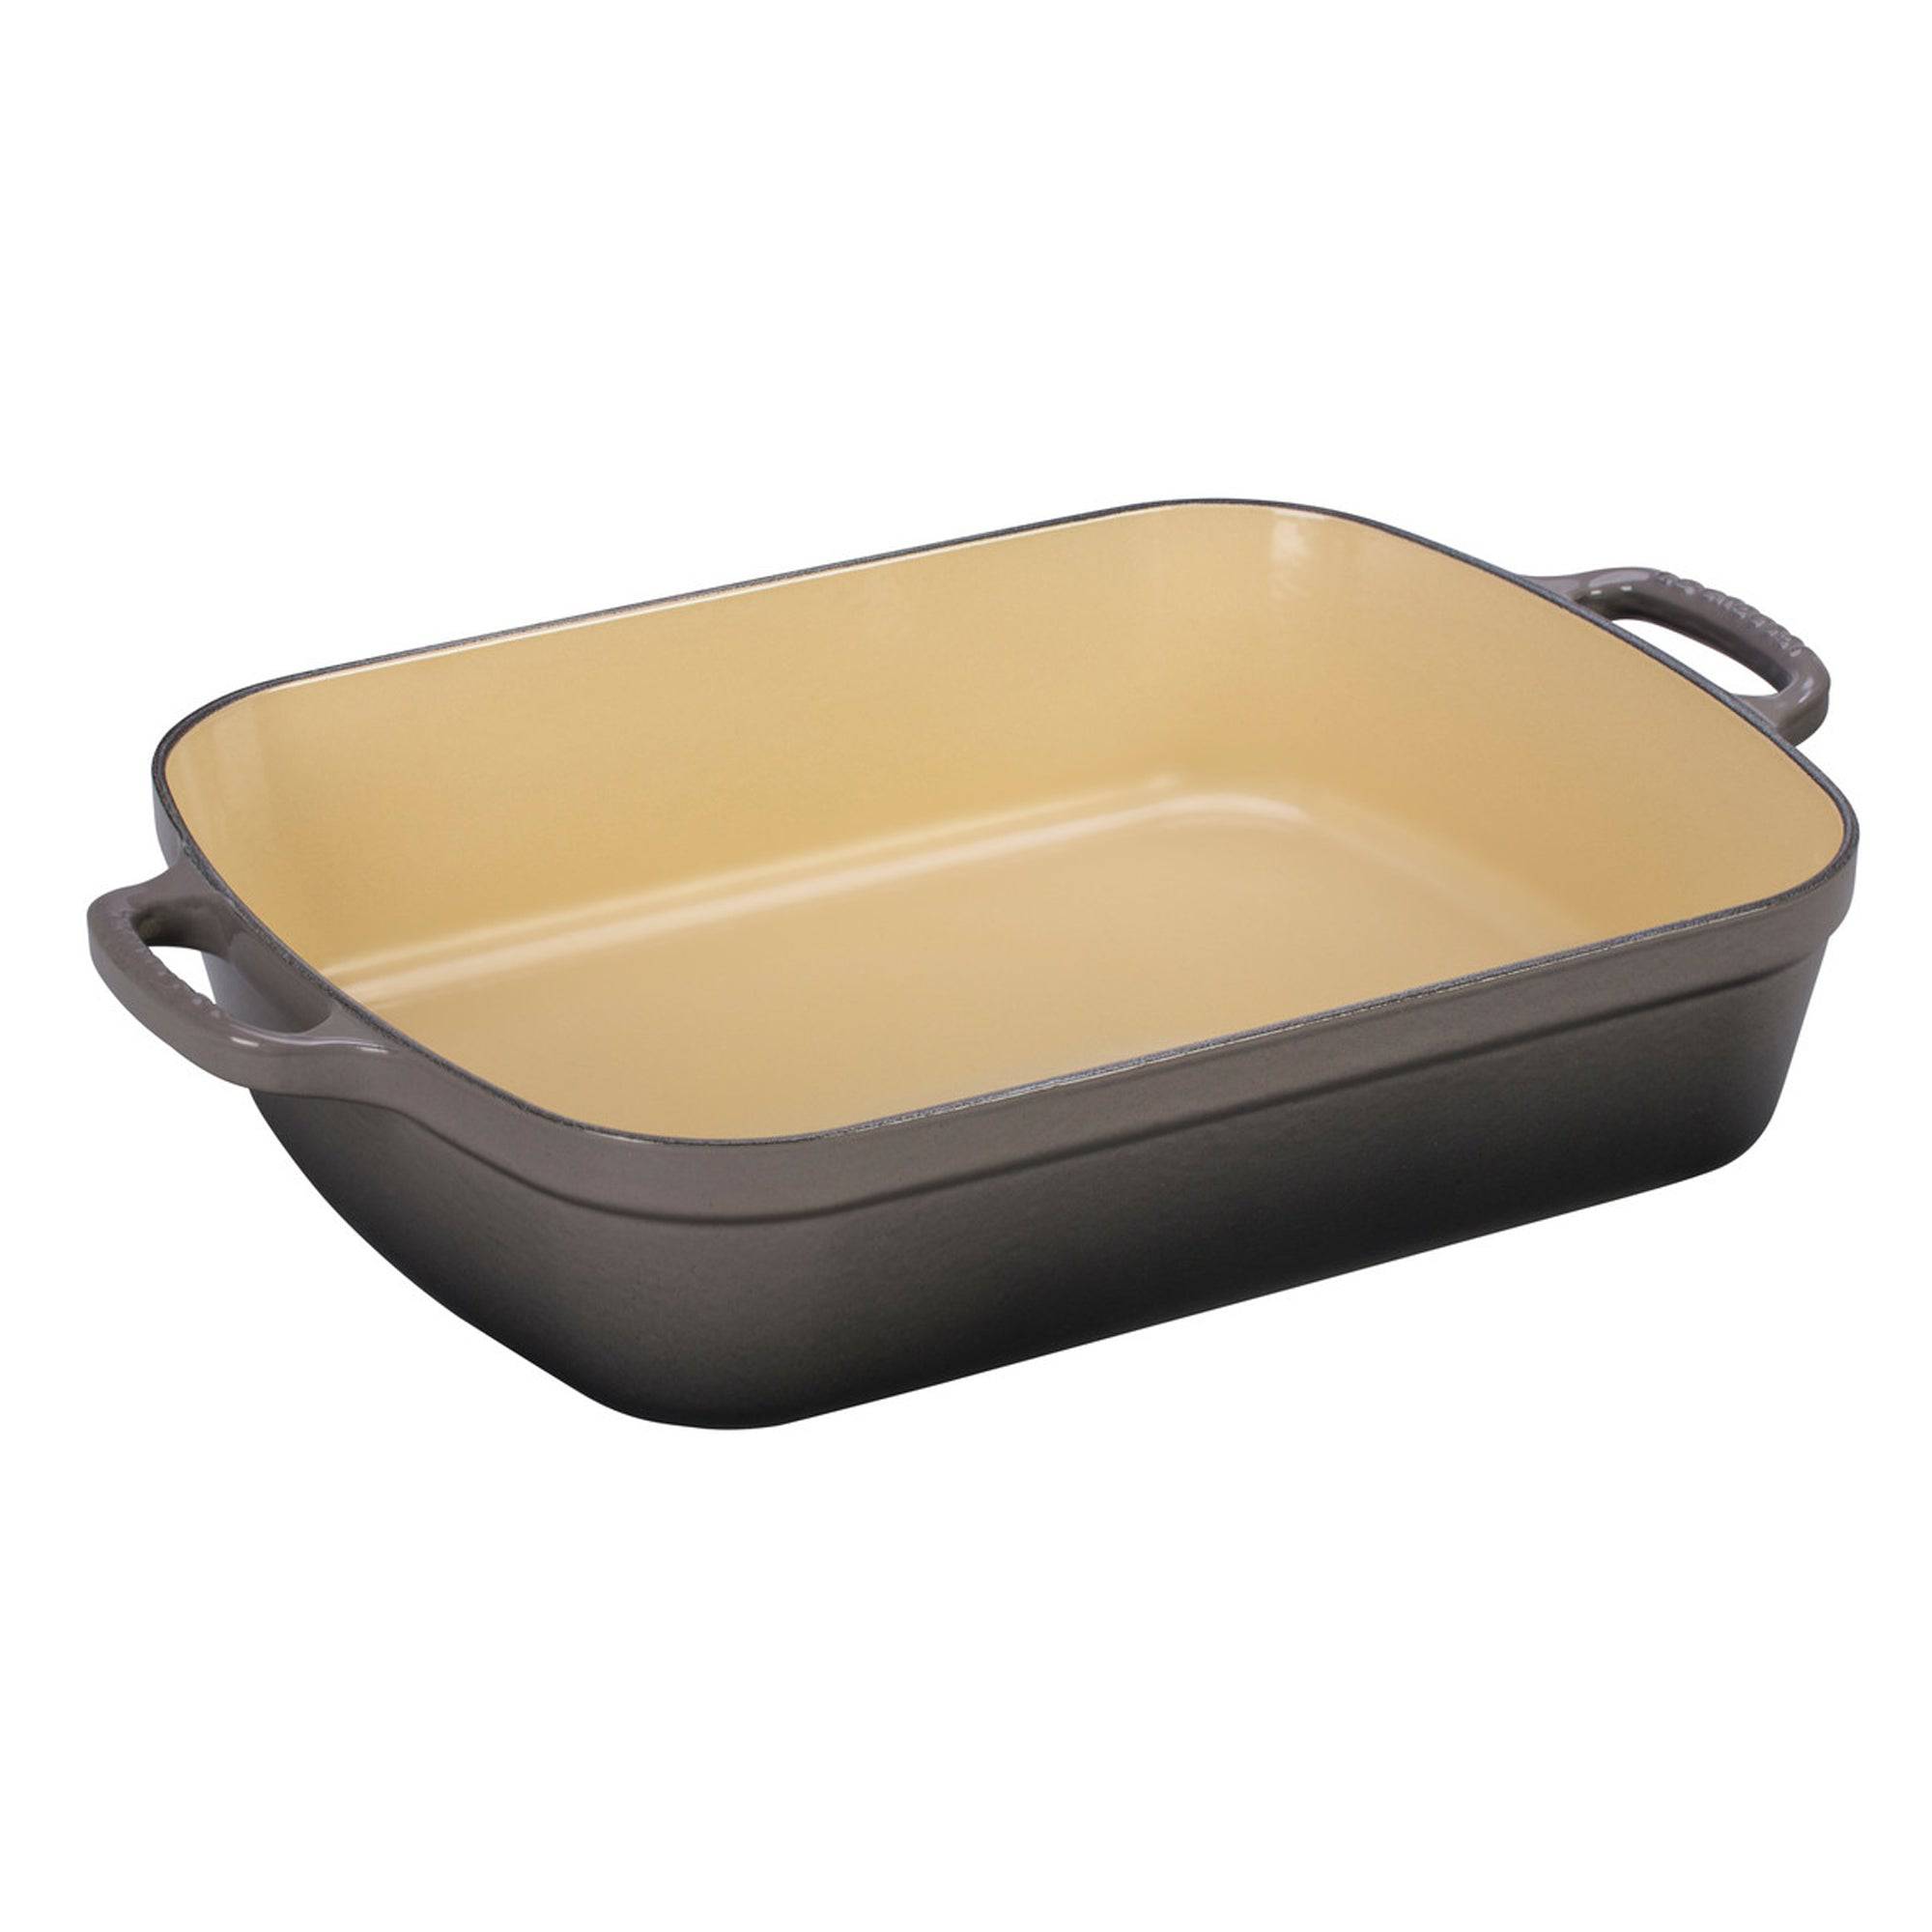 Cast Iron Roasting Pan with Frying Pan/Lid